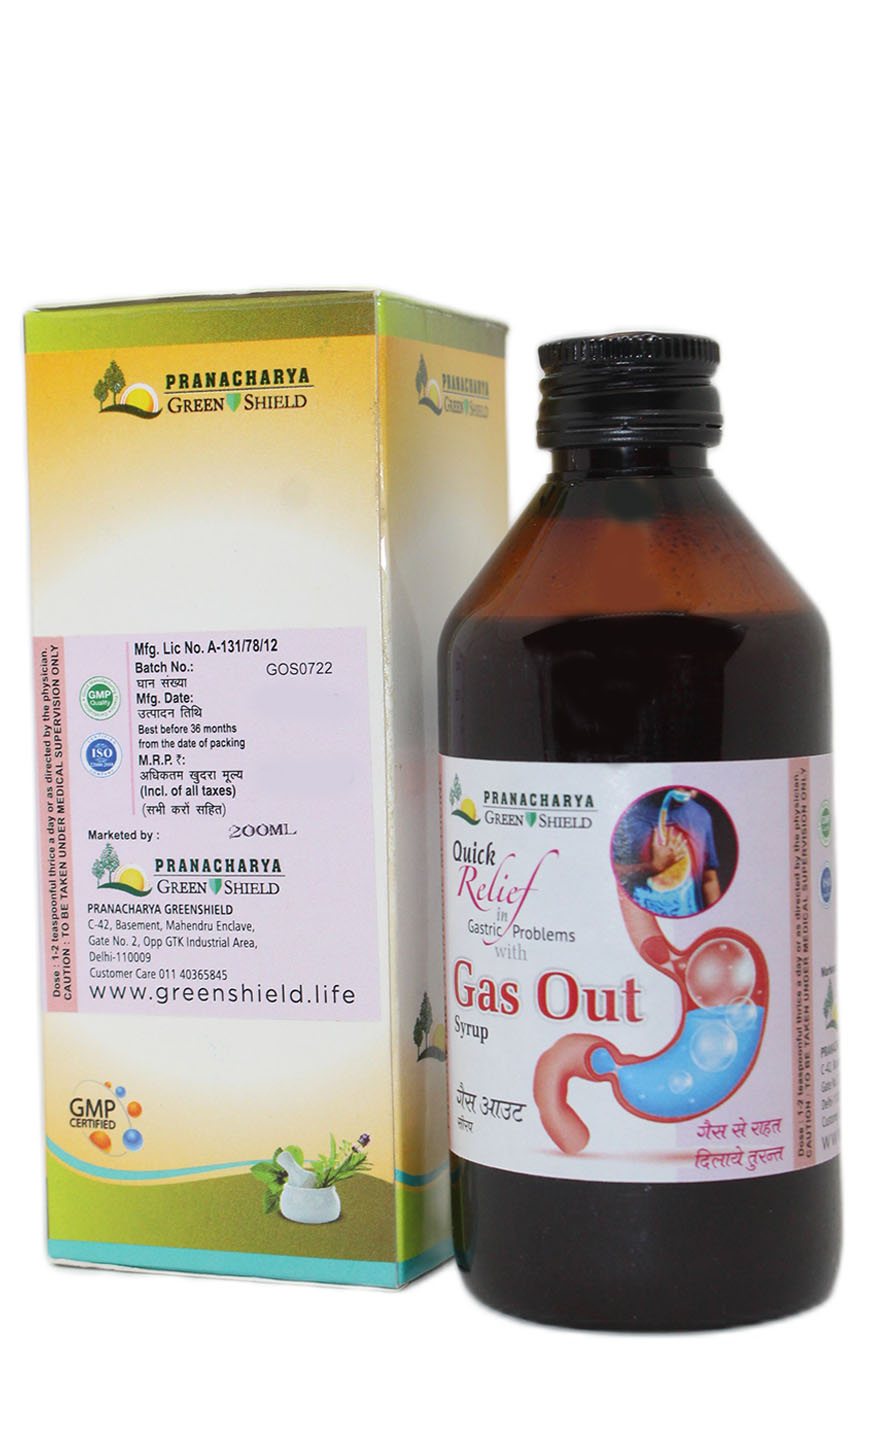 Buy Gasout Online for gastric problemHealth and BeautyHealth Care ProductsNorth DelhiModel Town